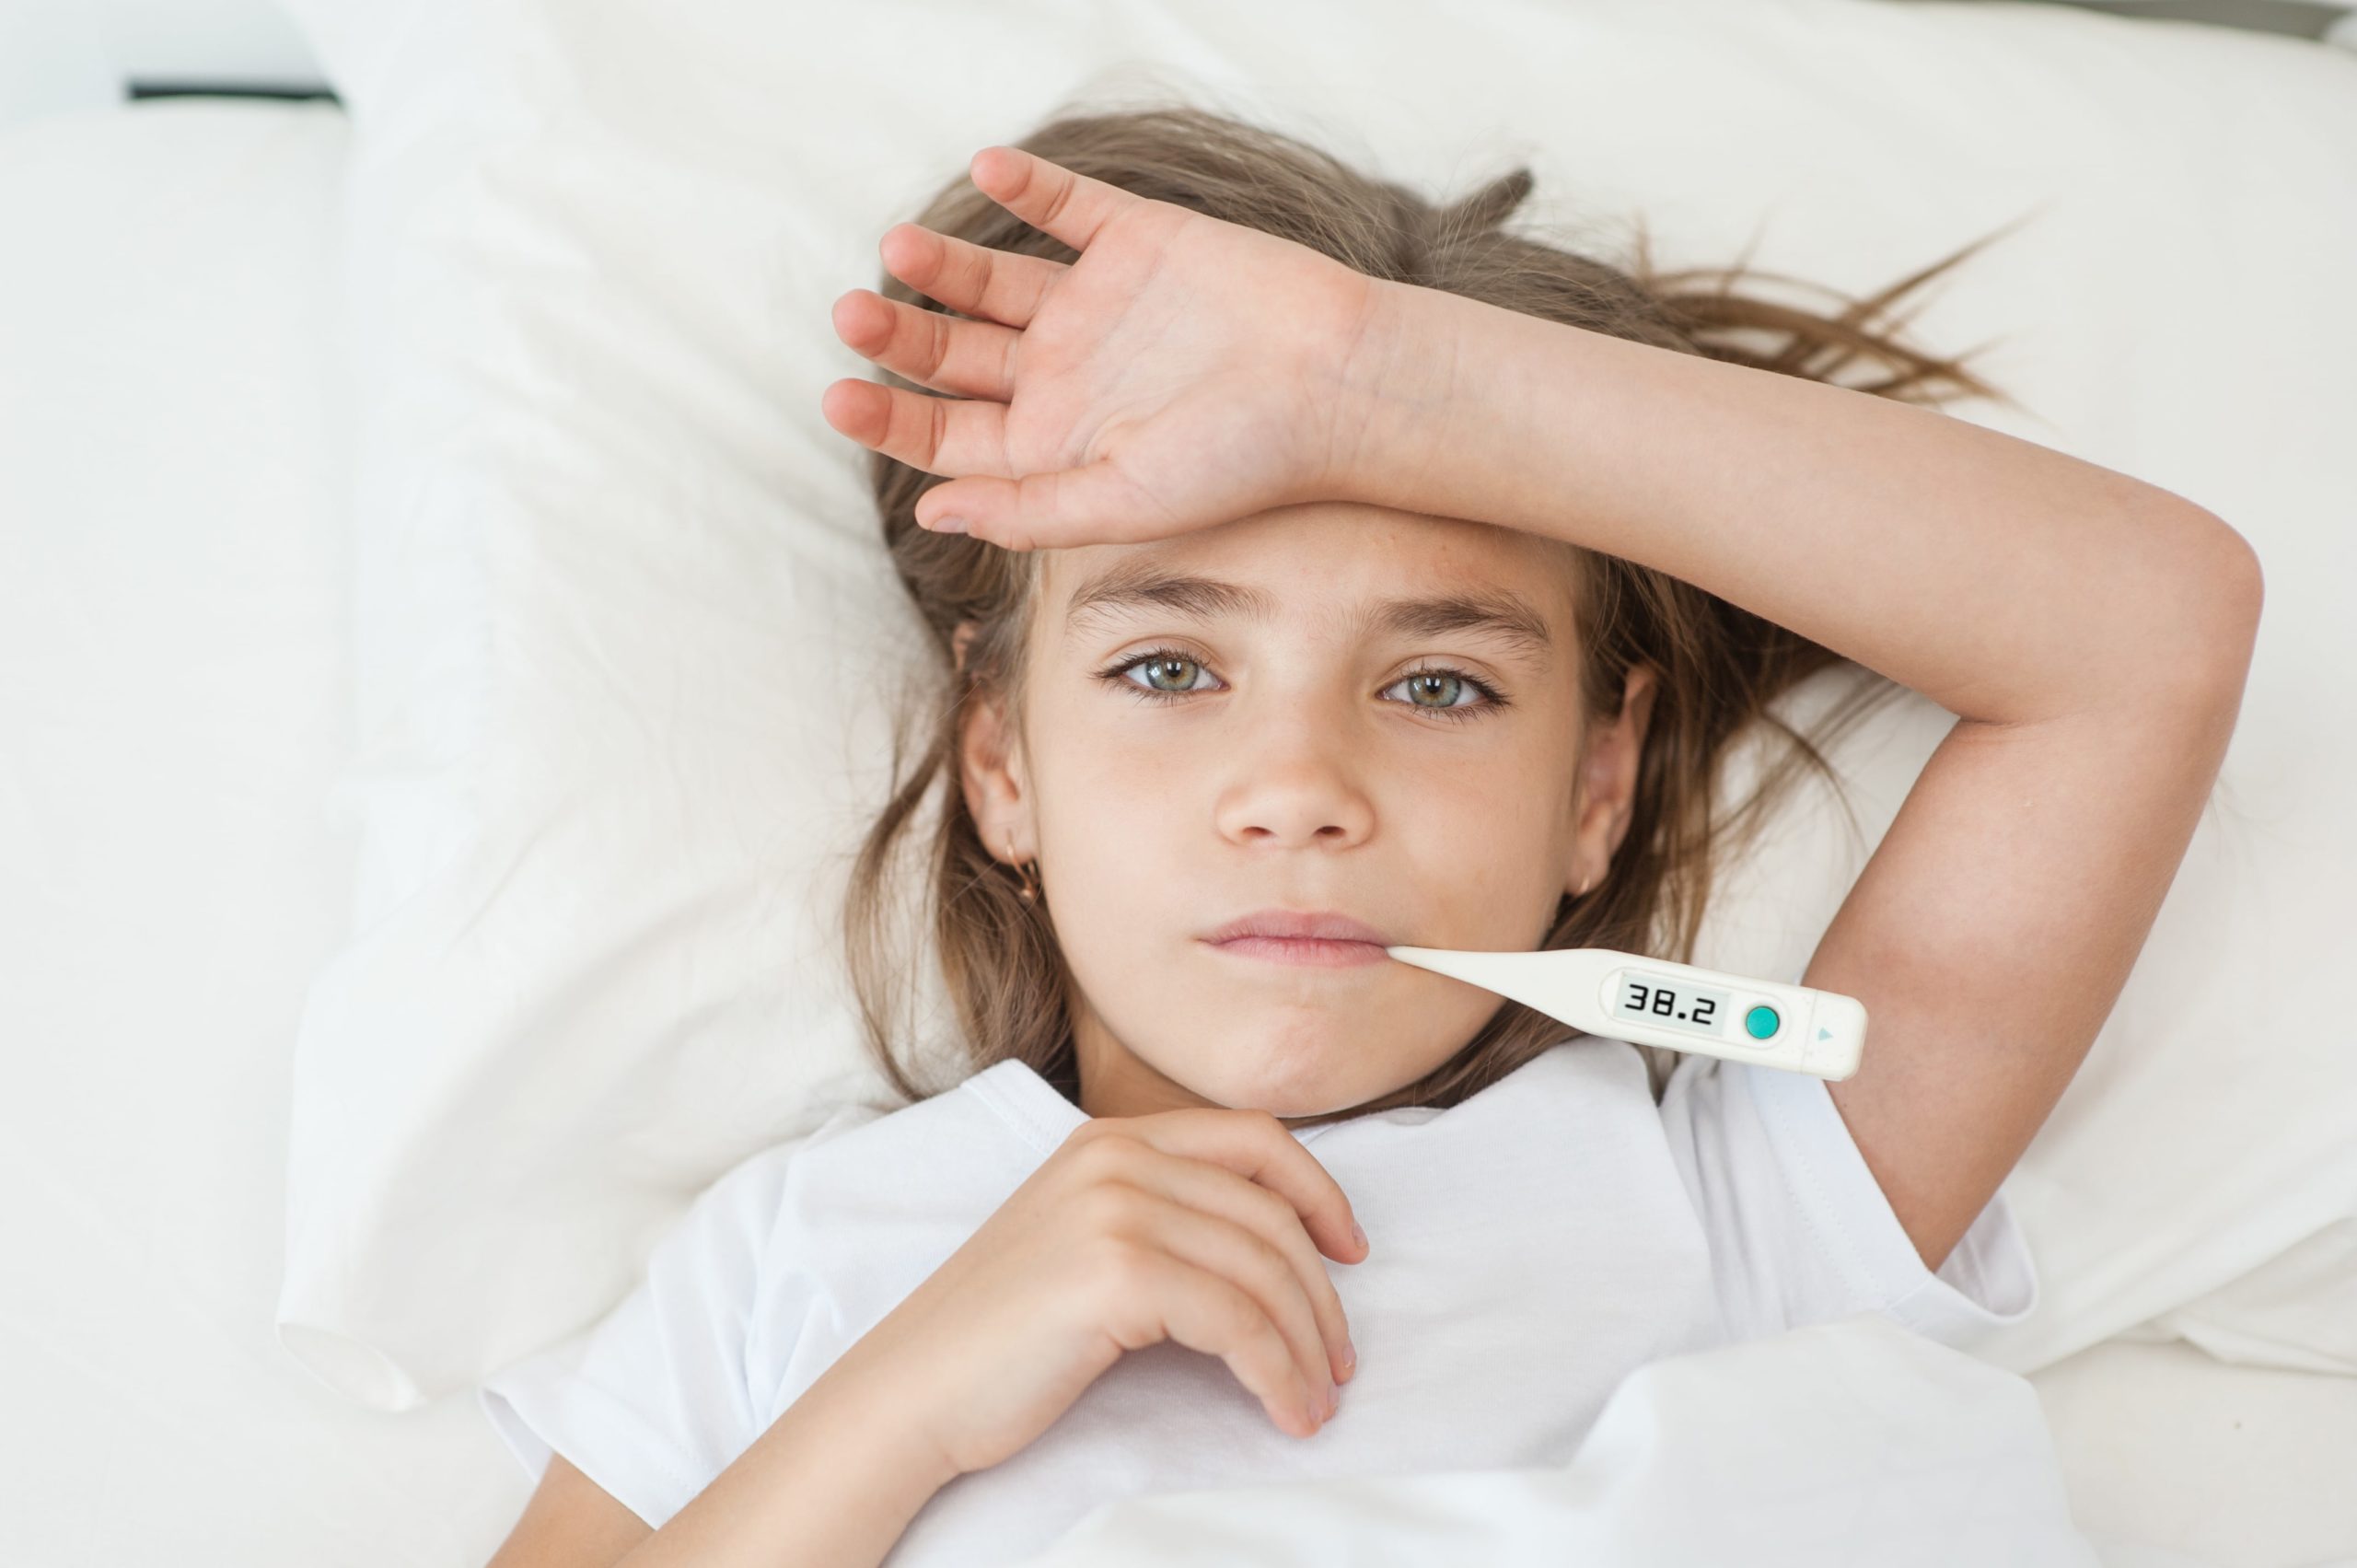 girl sick in bed with thermometer